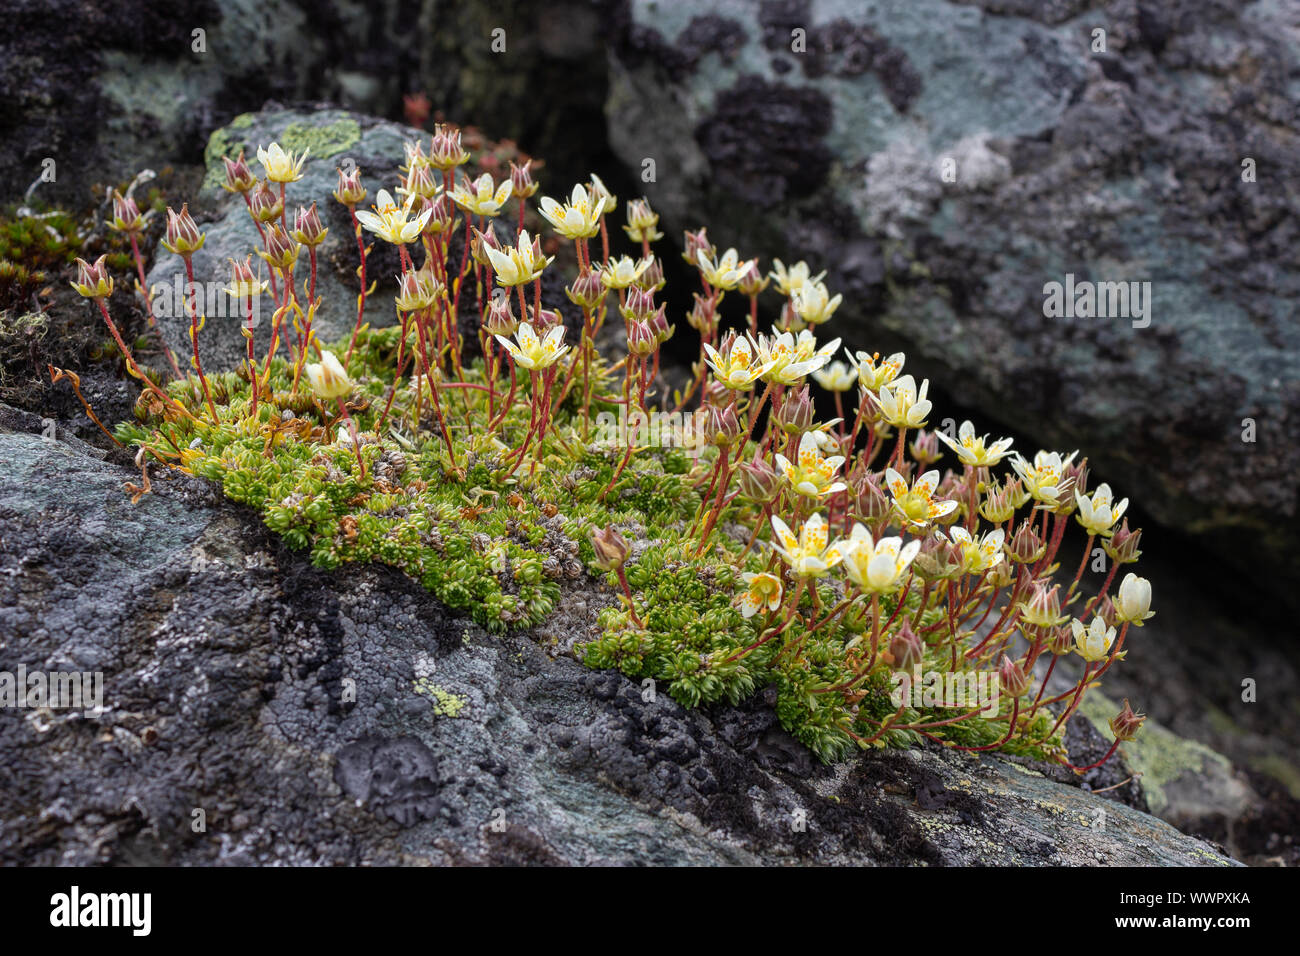 Alpine flower Saxifraga Bryoides (mossy saxifrage) on rock. Low perspective. Aosta valley, Italy. Stock Photo